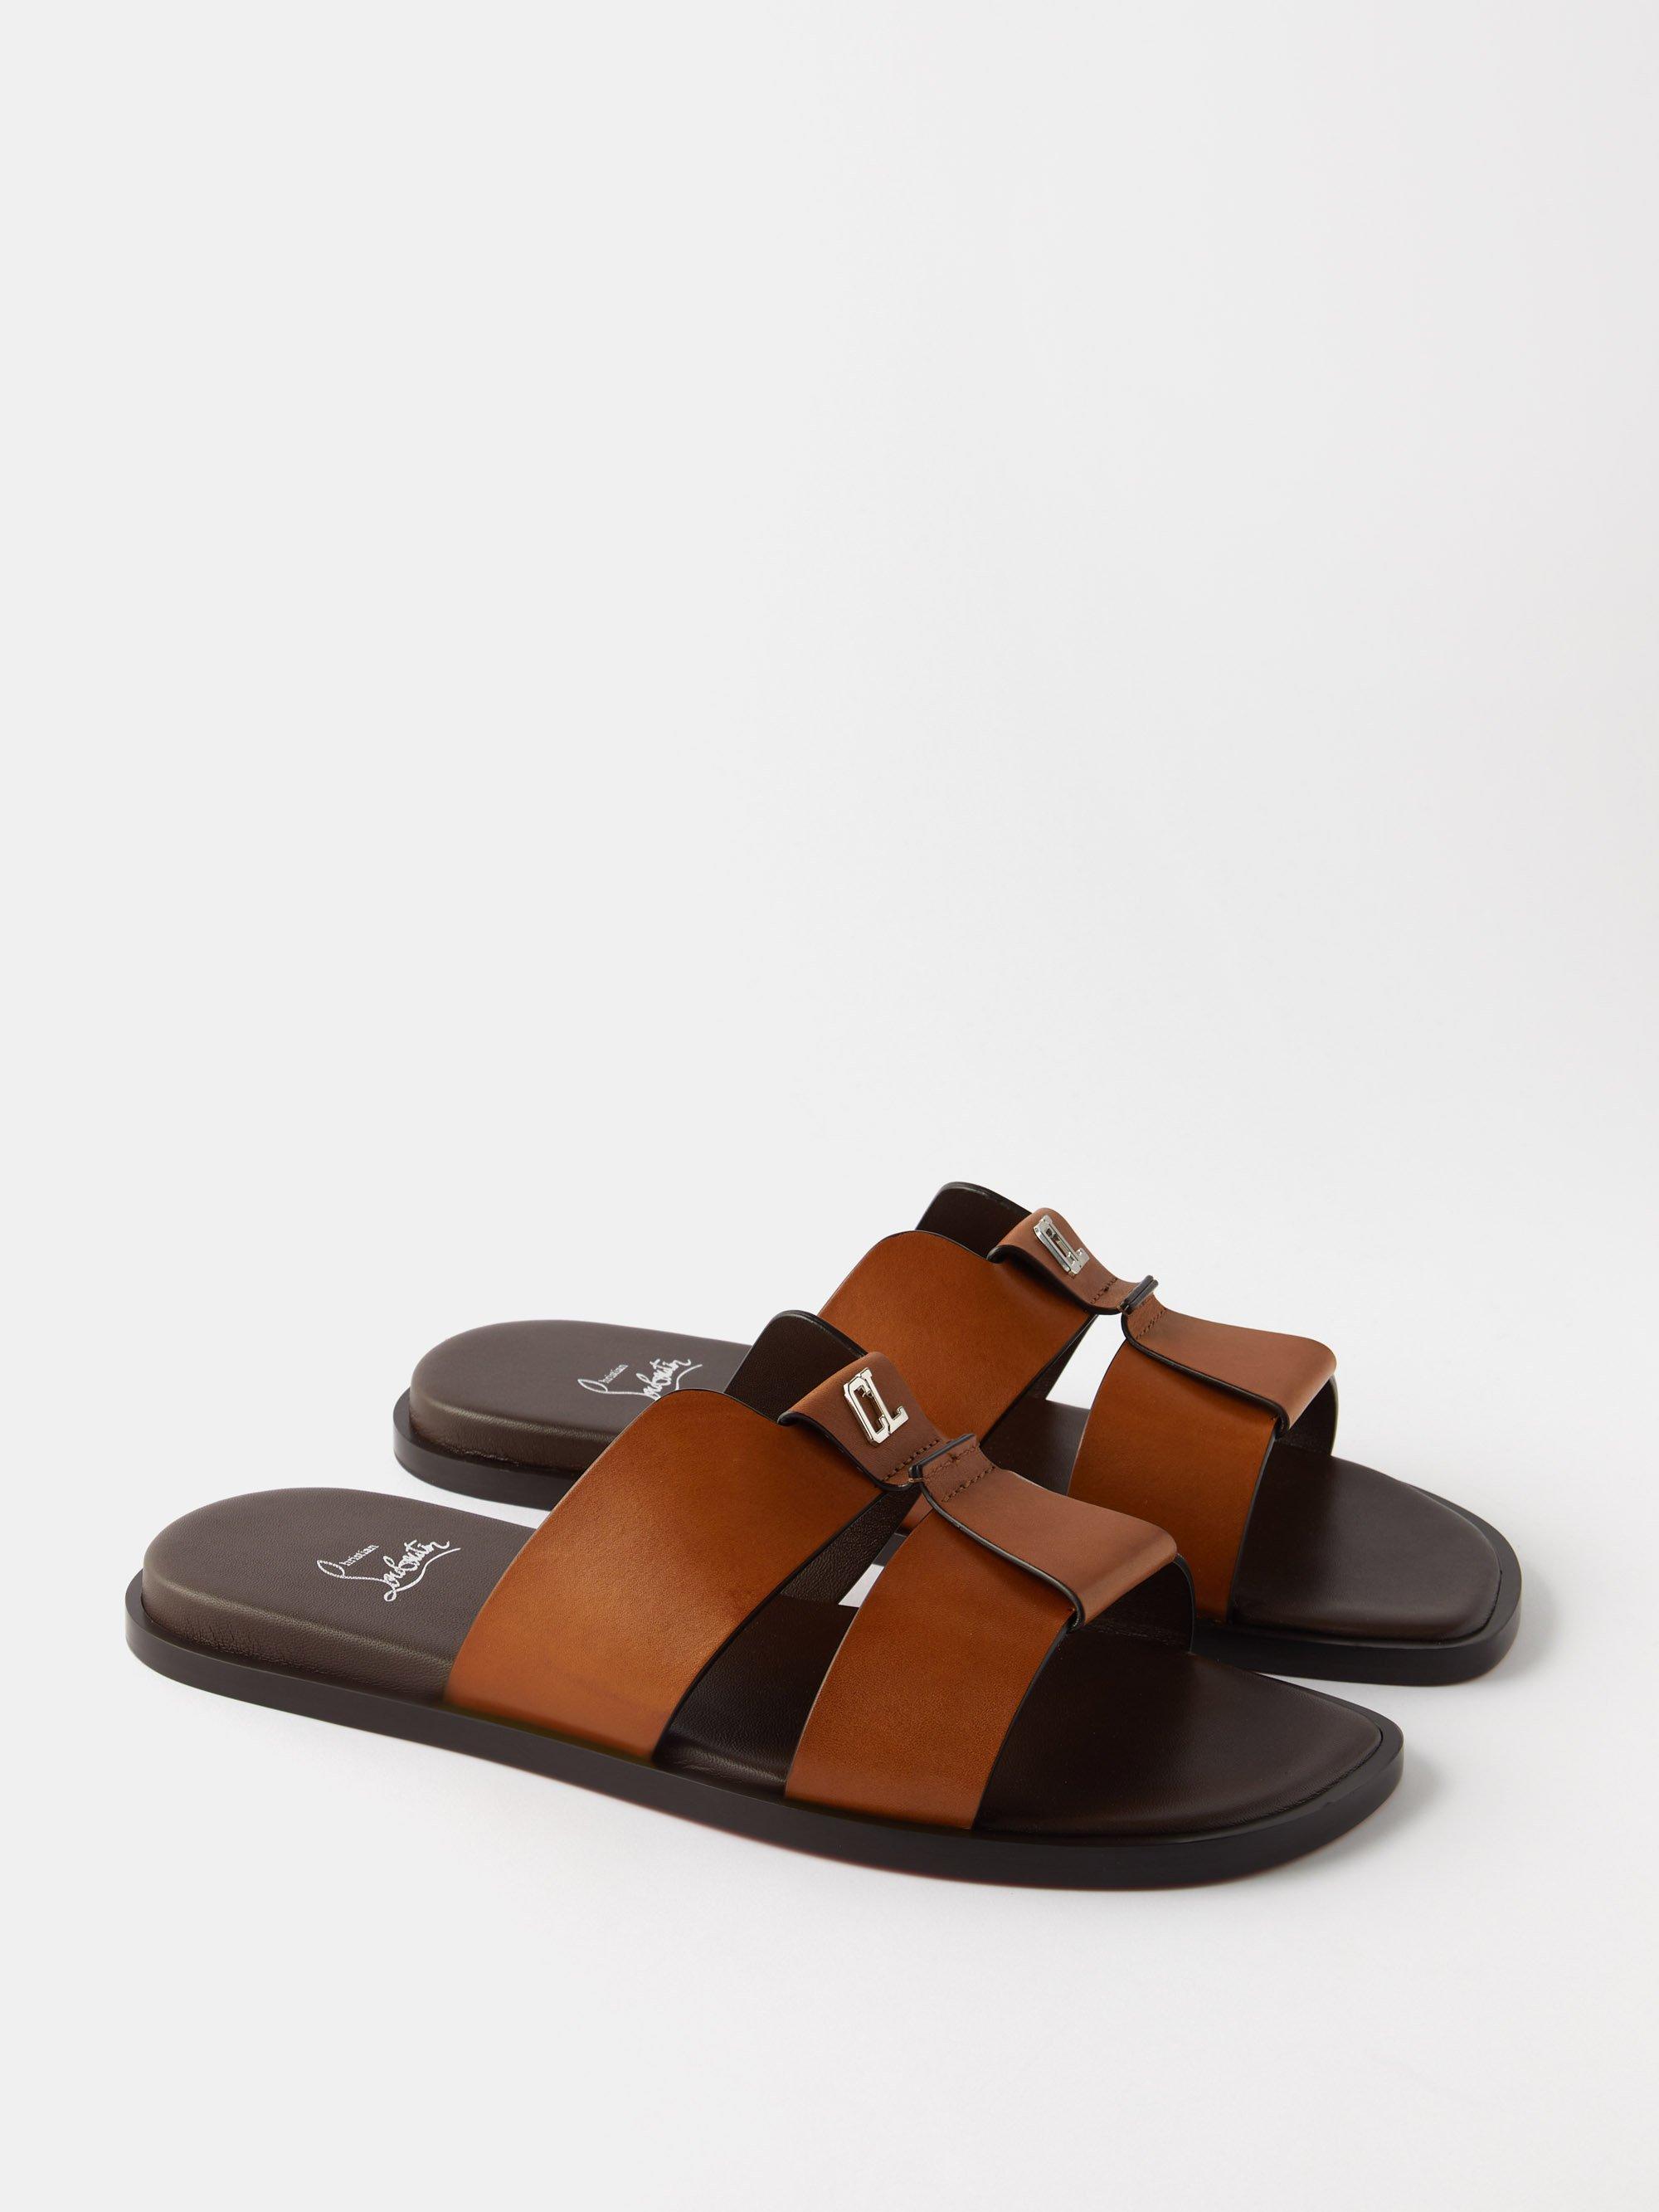 Christian Louboutin Loubi Be Leather Sandals in Brown for Men